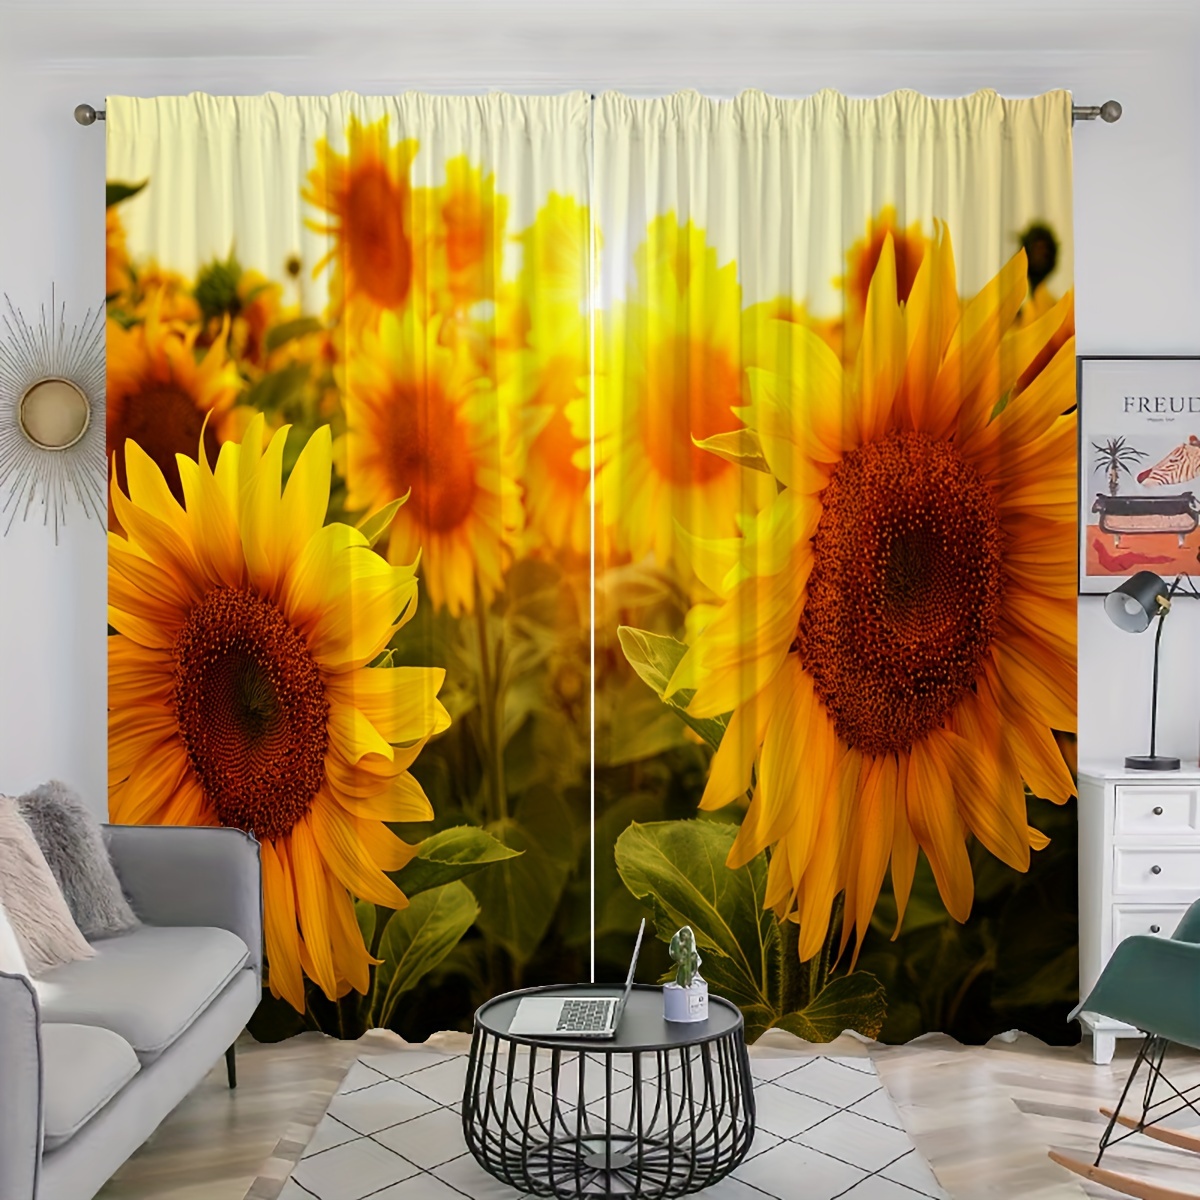 

2pcs, Sunflower Curtains, Rod Pocket Curtain Suitable For Restaurants, Public Places, Living Rooms, Bedrooms, Offices, Study Rooms, Home Decoration